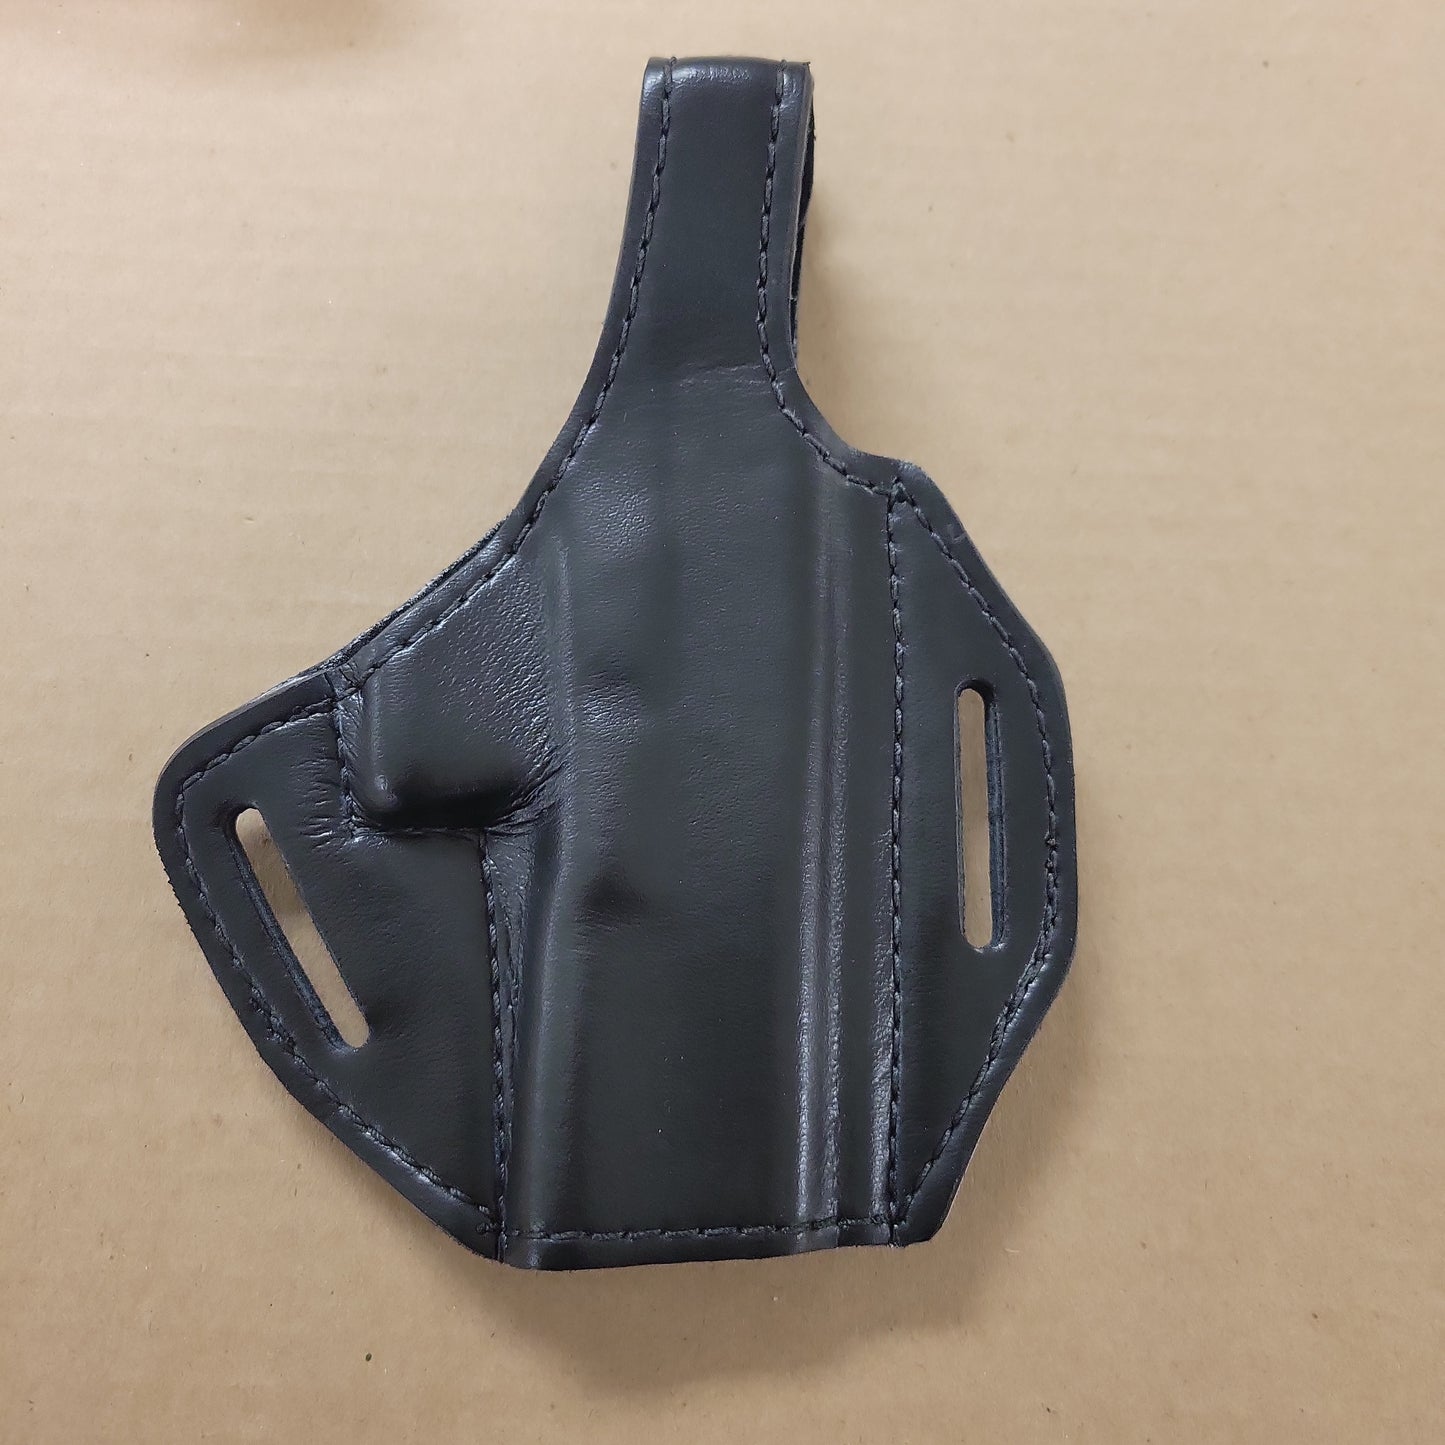 Safariland Holster Black Plain Leather Right Hand For Glock 17/22 747-83-61